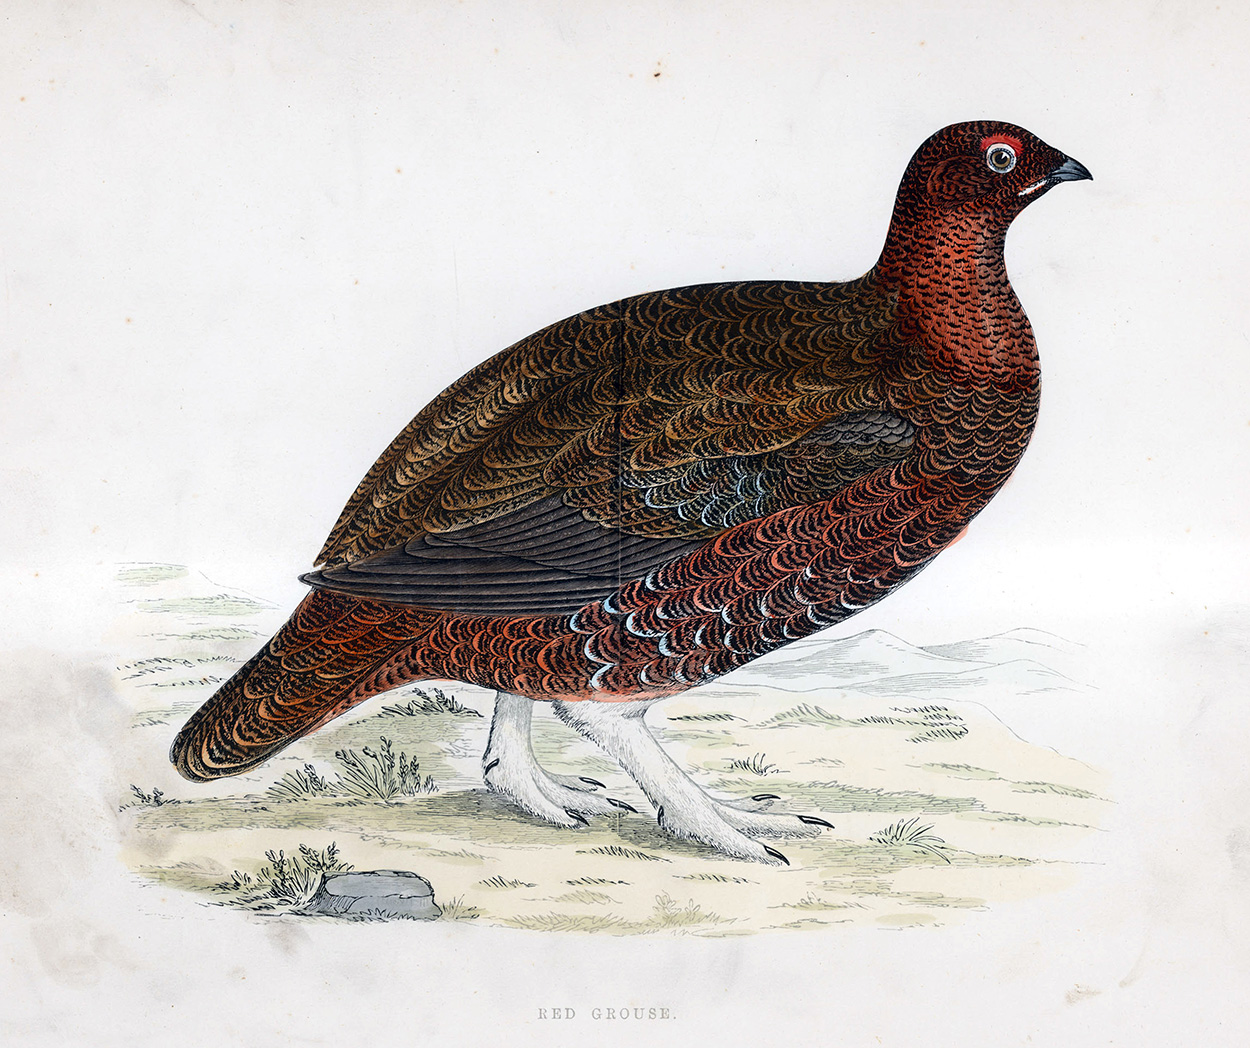 Red Grouse - hand coloured lithograph 1891 (Print) art by Beverley R Morris at The Illustration Art Gallery